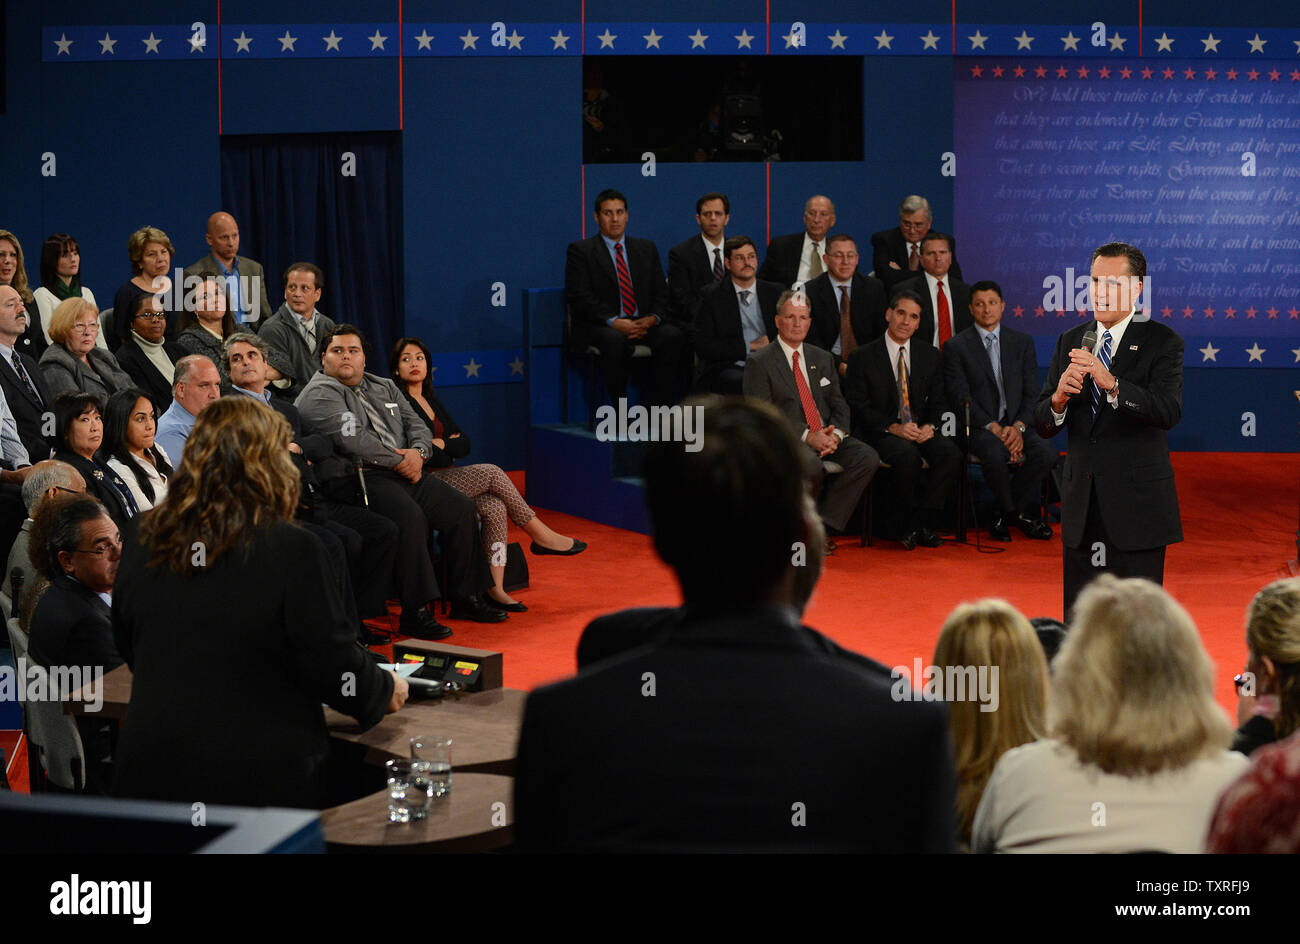 Republican nominee Mitt Romney responds to a question during the second Presidential Debate, Town-Hall style, at Hofstra University on October 16, 2012 in Hempstead, New York.     UPI/Pat Benic Stock Photo